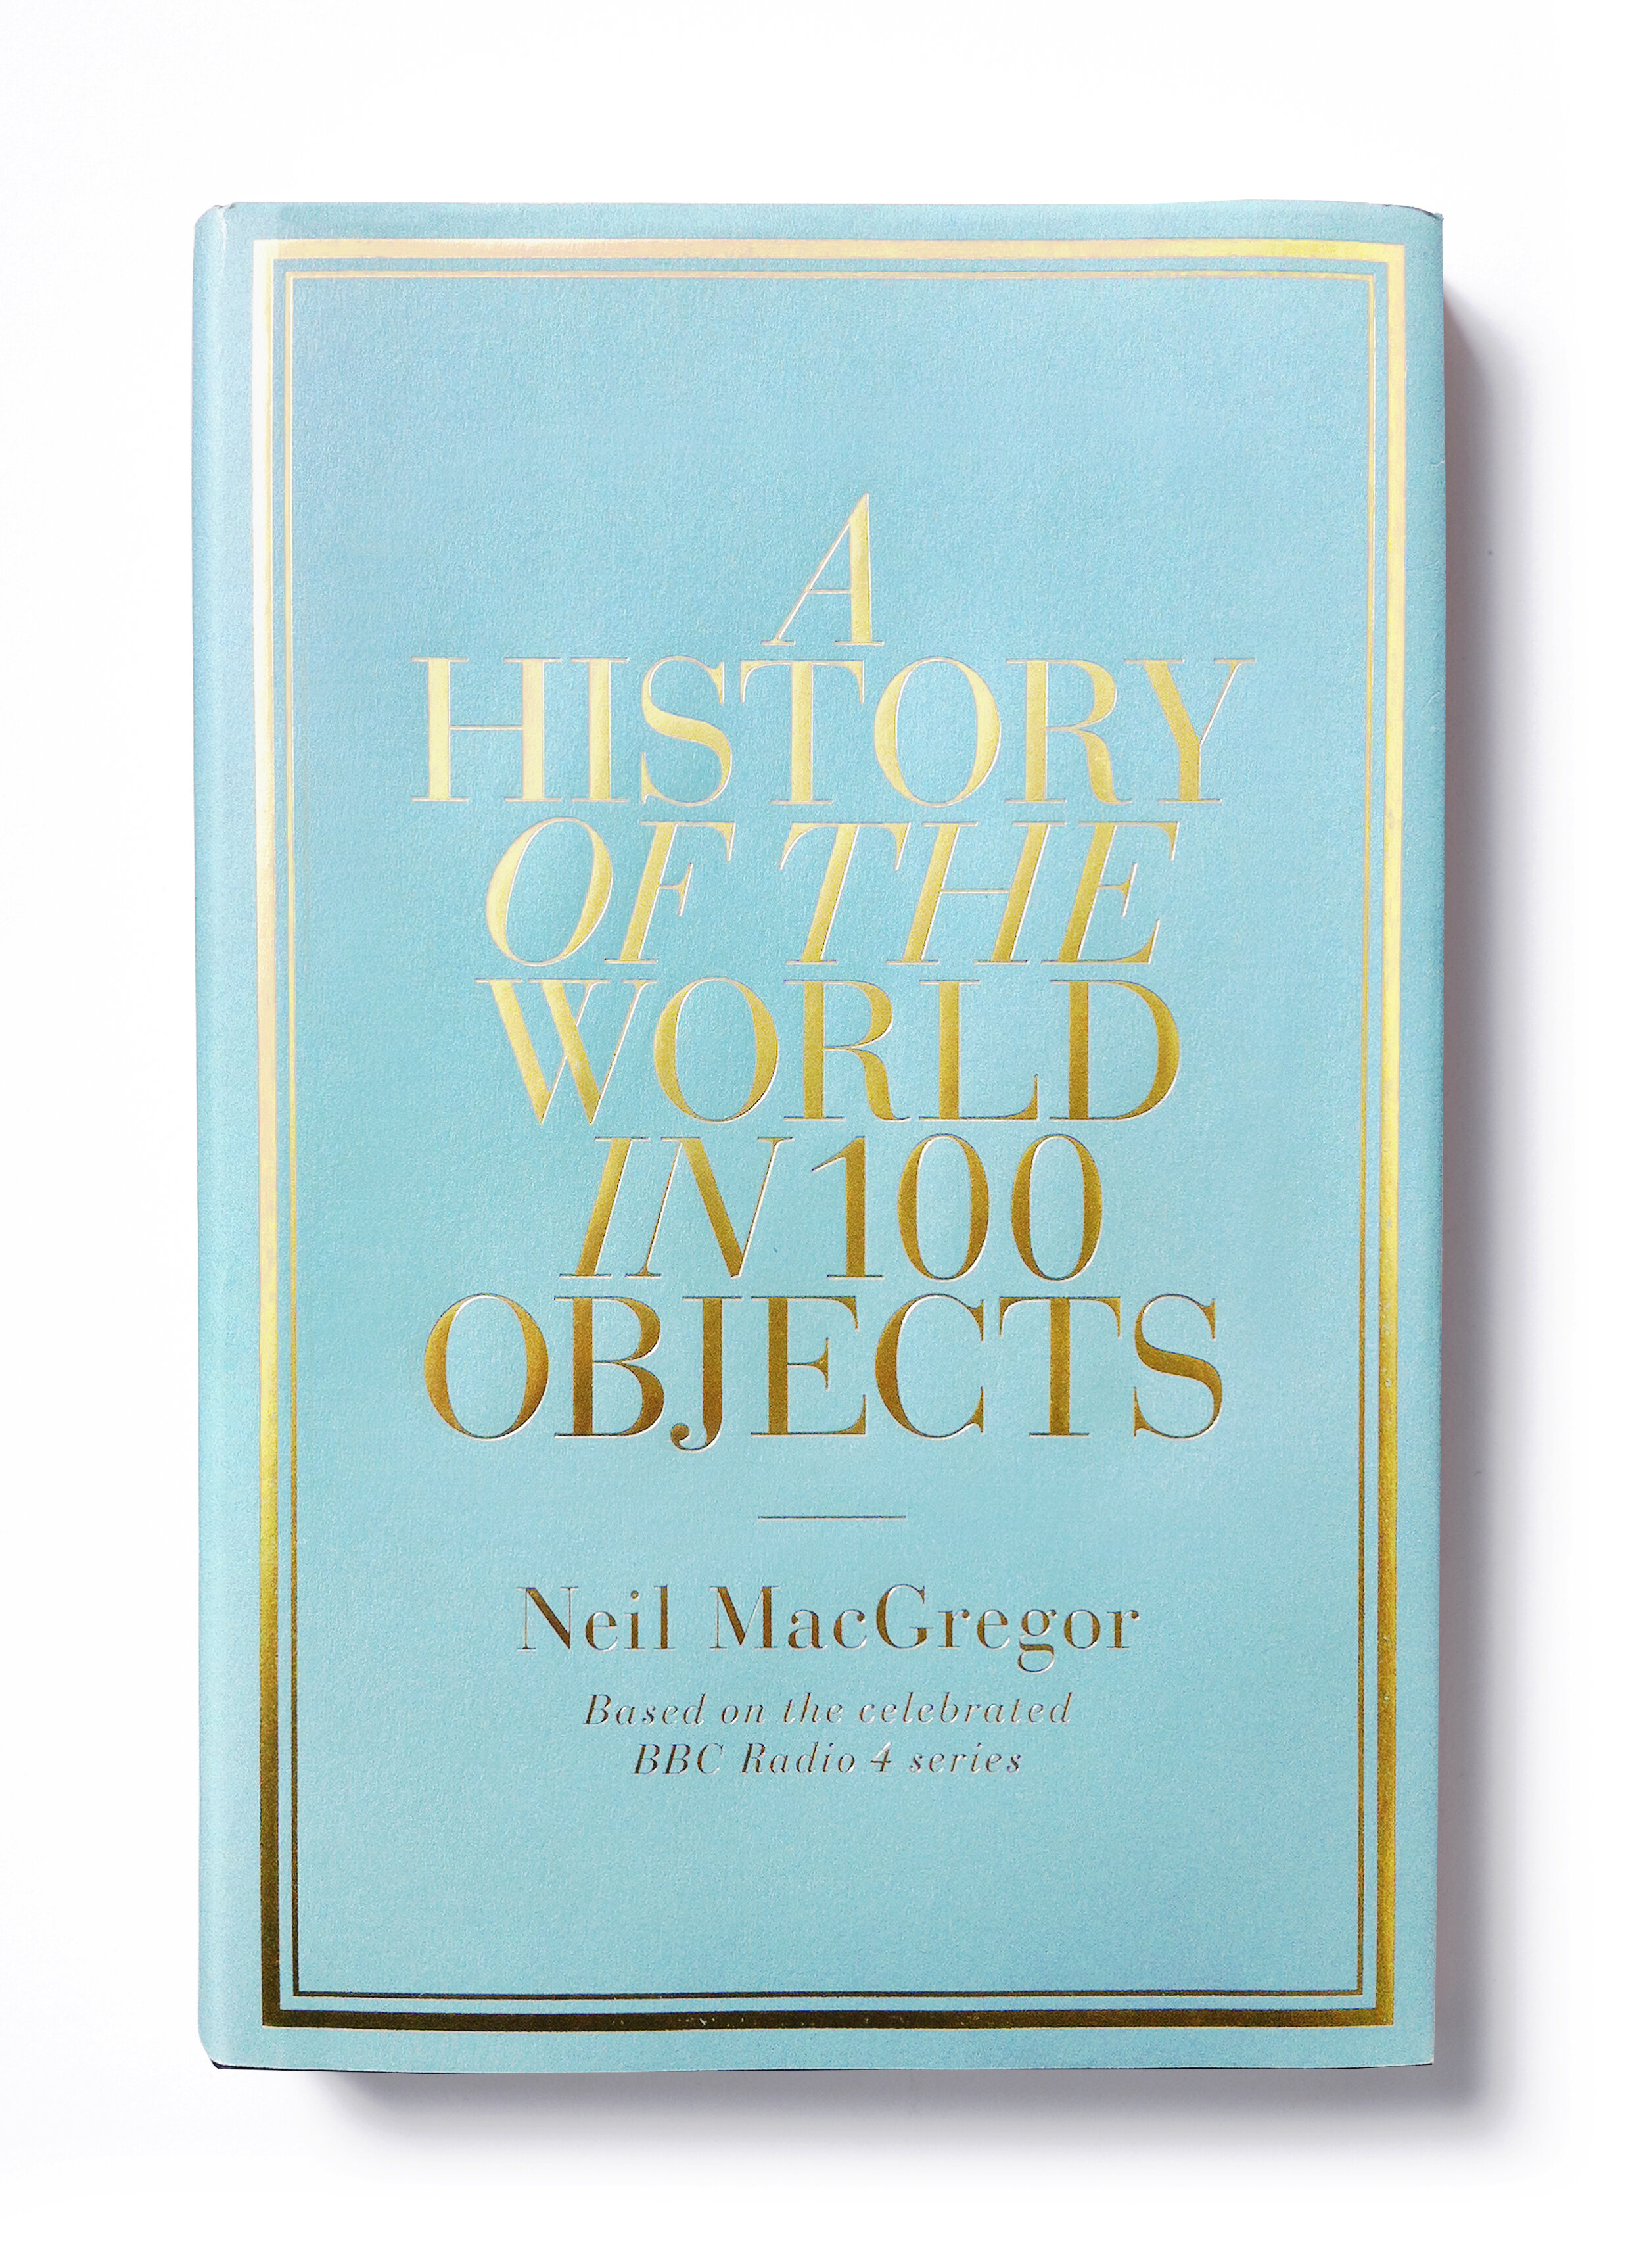  A History of the World in 100 Objects by Neil MacGregor - Design: Jim Stoddart  